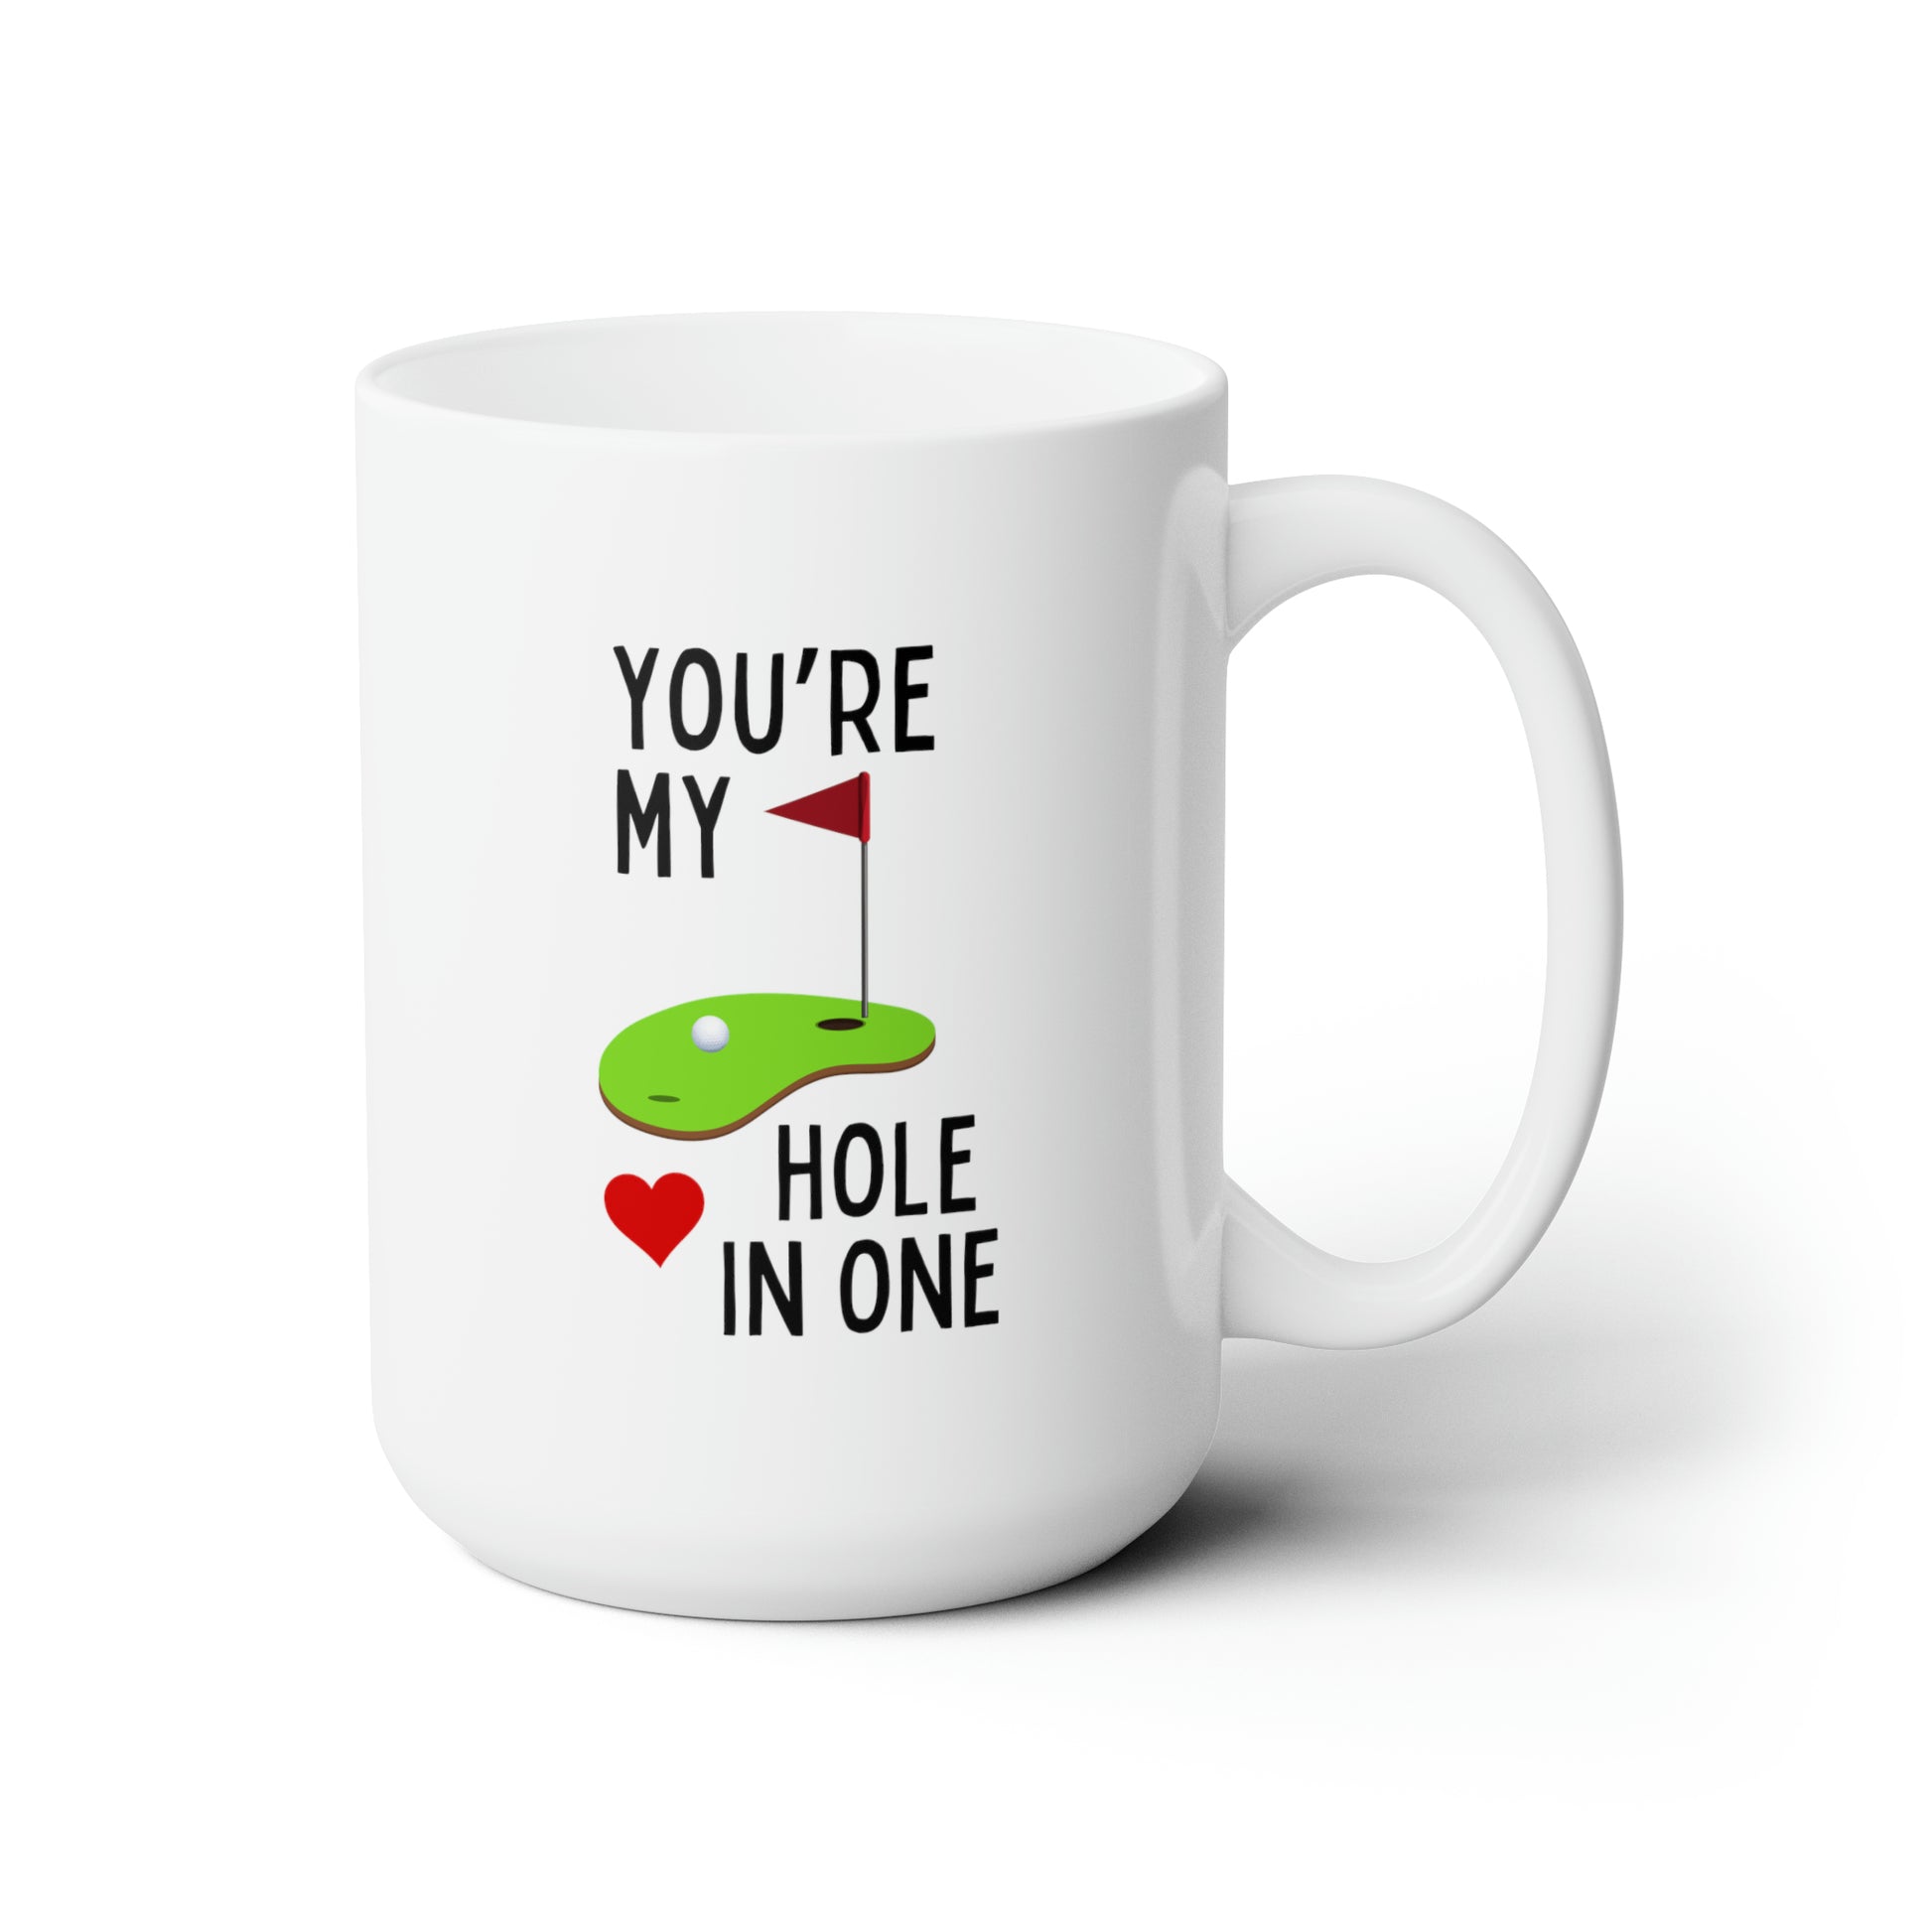 You're My Hole In One 15oz white funny large coffee mug gift for golf player lover husband boyfriend golfer waveywares wavey wares wavywares wavy wares